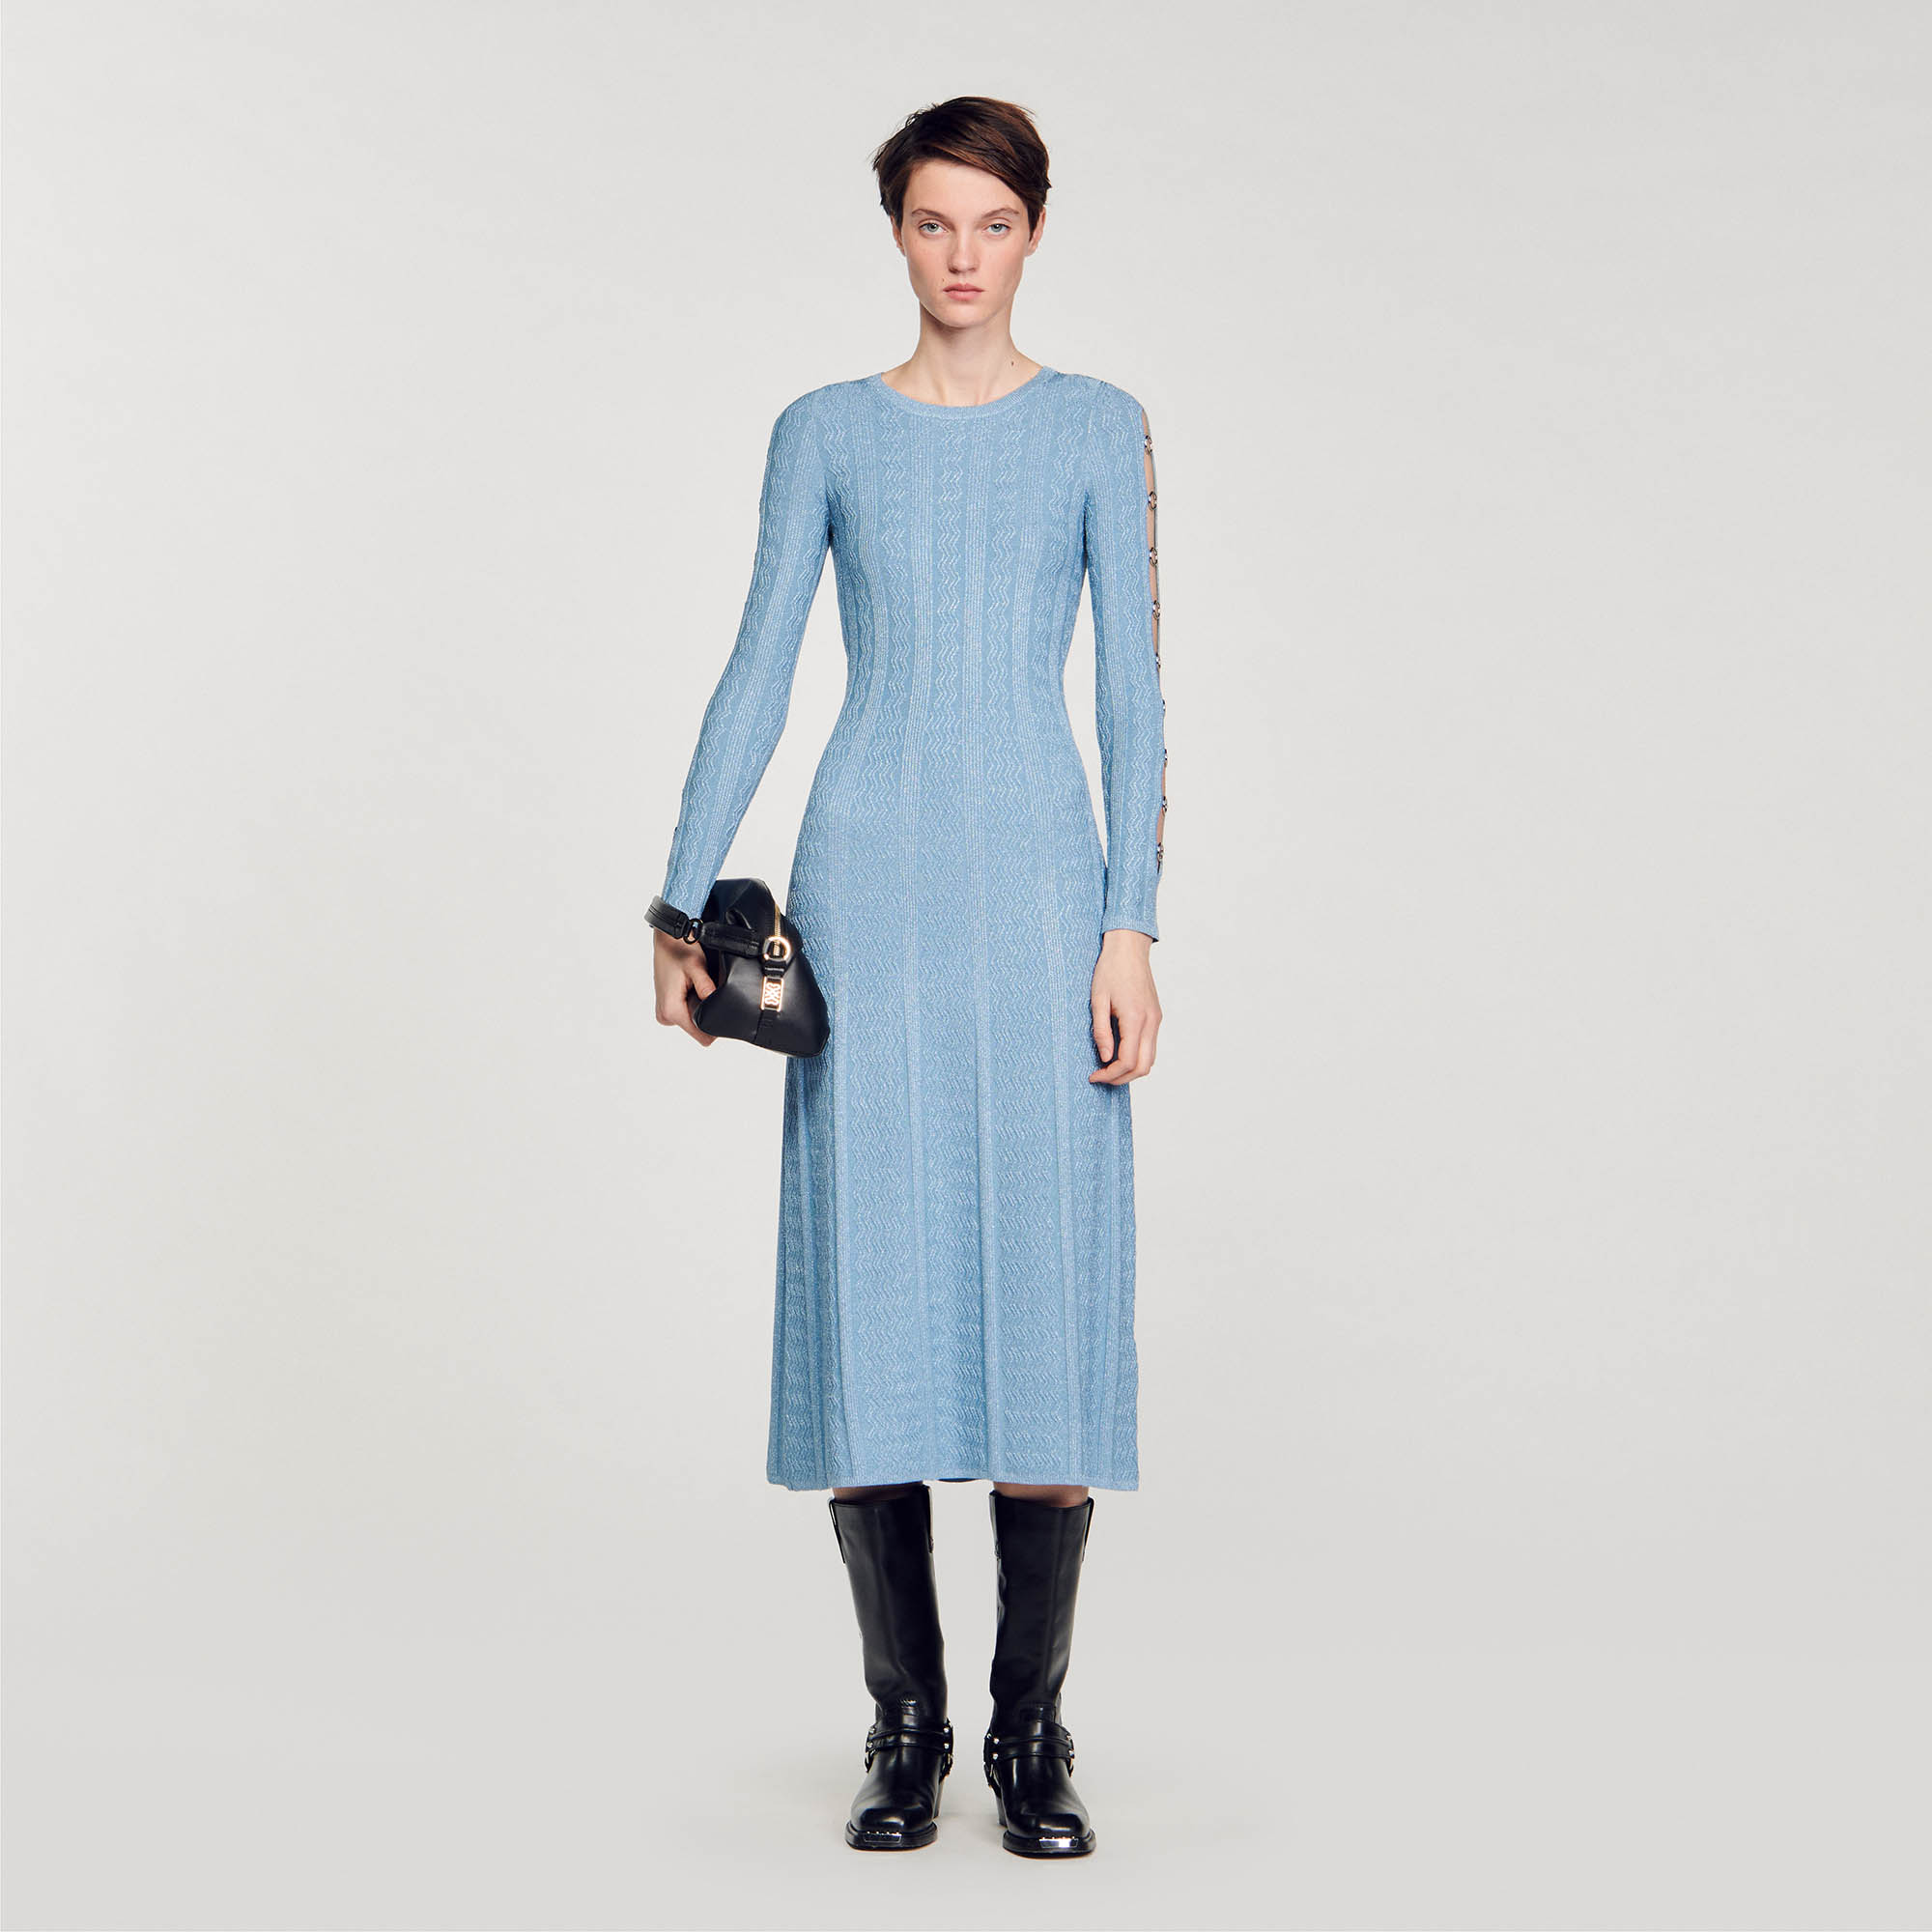 Sandro polyester Midi dress in iridescent cable knit with round neck and long sleeves embellished with metal rings along the arms